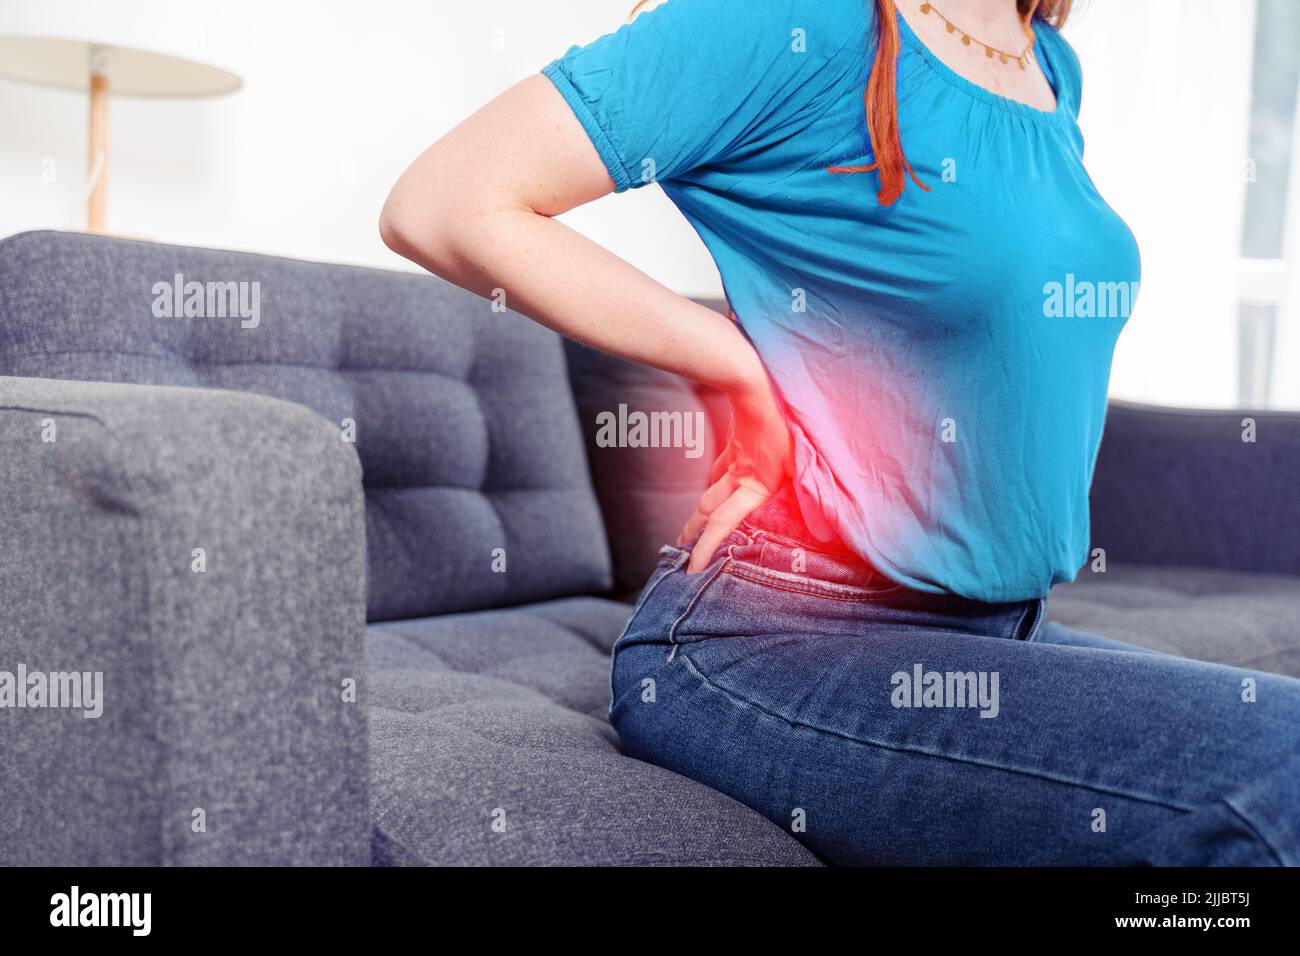 Woman low back close up suffering back pain sitting on the couch at home Stock Photo